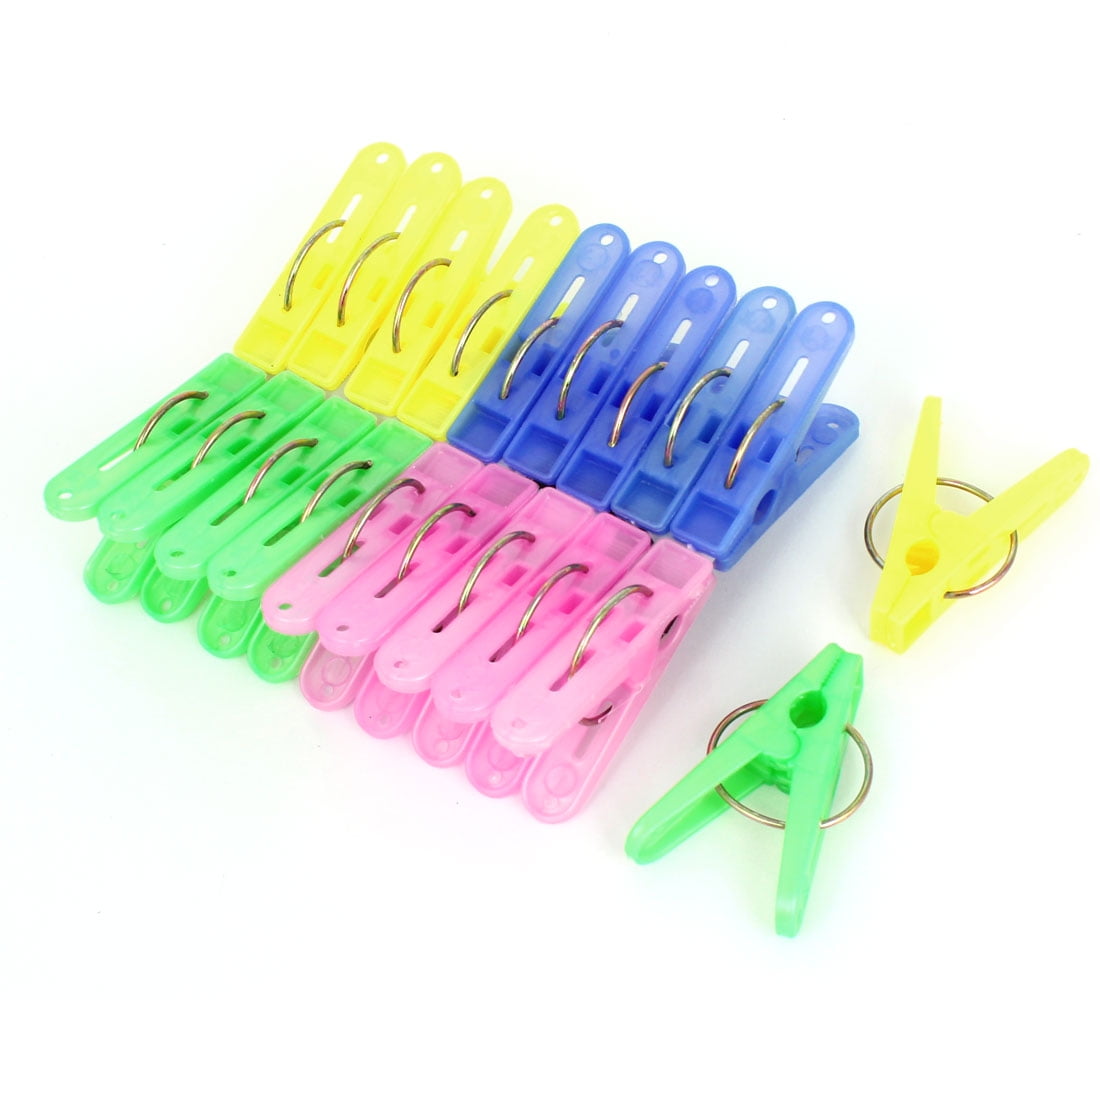 24 Plastic ClothesPins Colored Laundry Clips Pegs for Hanging Clothes 2" 